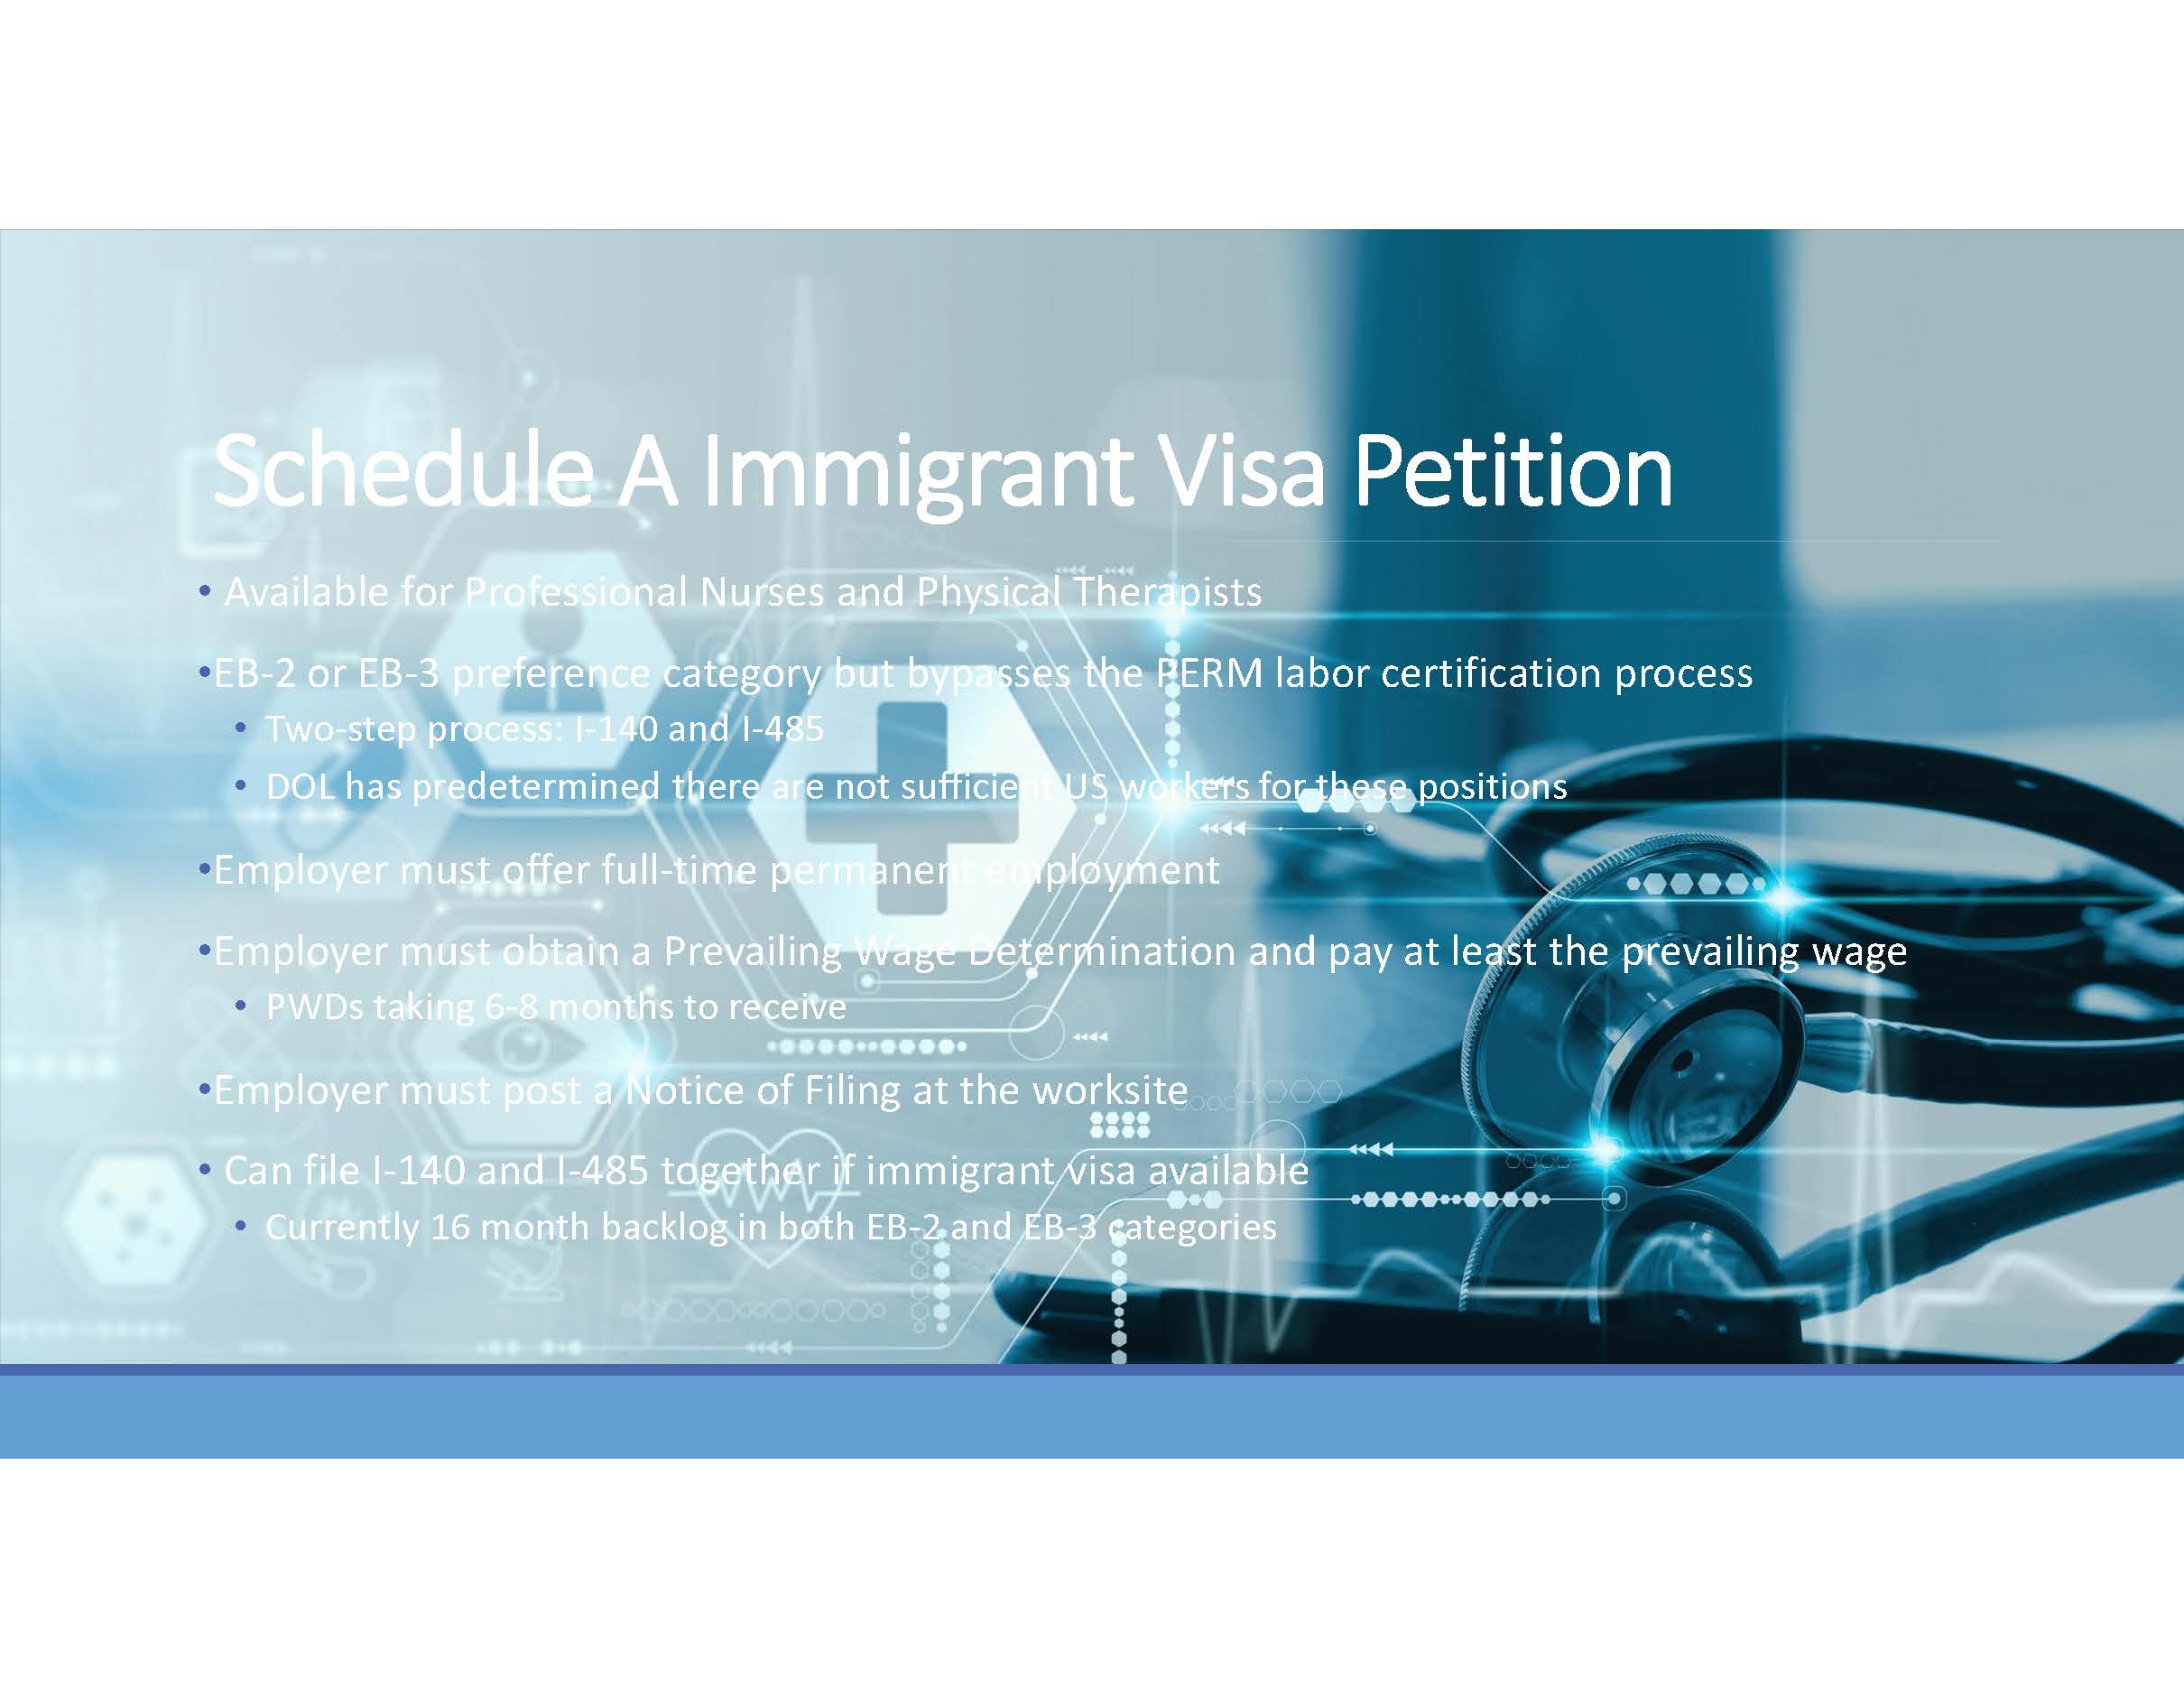 Schedule A Immigrant Visa Petition. Available for Professional Nurses and Physical Therapists. EB-2 or EB-3 preference category but bypasses the PERM labor certification process. Two-step process: I-140 and I-485. DOL has predetermined there are not sufficient US workers for these positions. Employer must offer full-time permanent employment. Employer must obtain a Prevailing Wage Determination and pay at least the prevailing wage. PWDs taking 6-8 months to receive. Employer must post a Notice of Filing at the worksite. Can file I-140 and I-485 together if immigrant visa available. Currently 16 month backlog in both EB-2 and EB-3 categories.